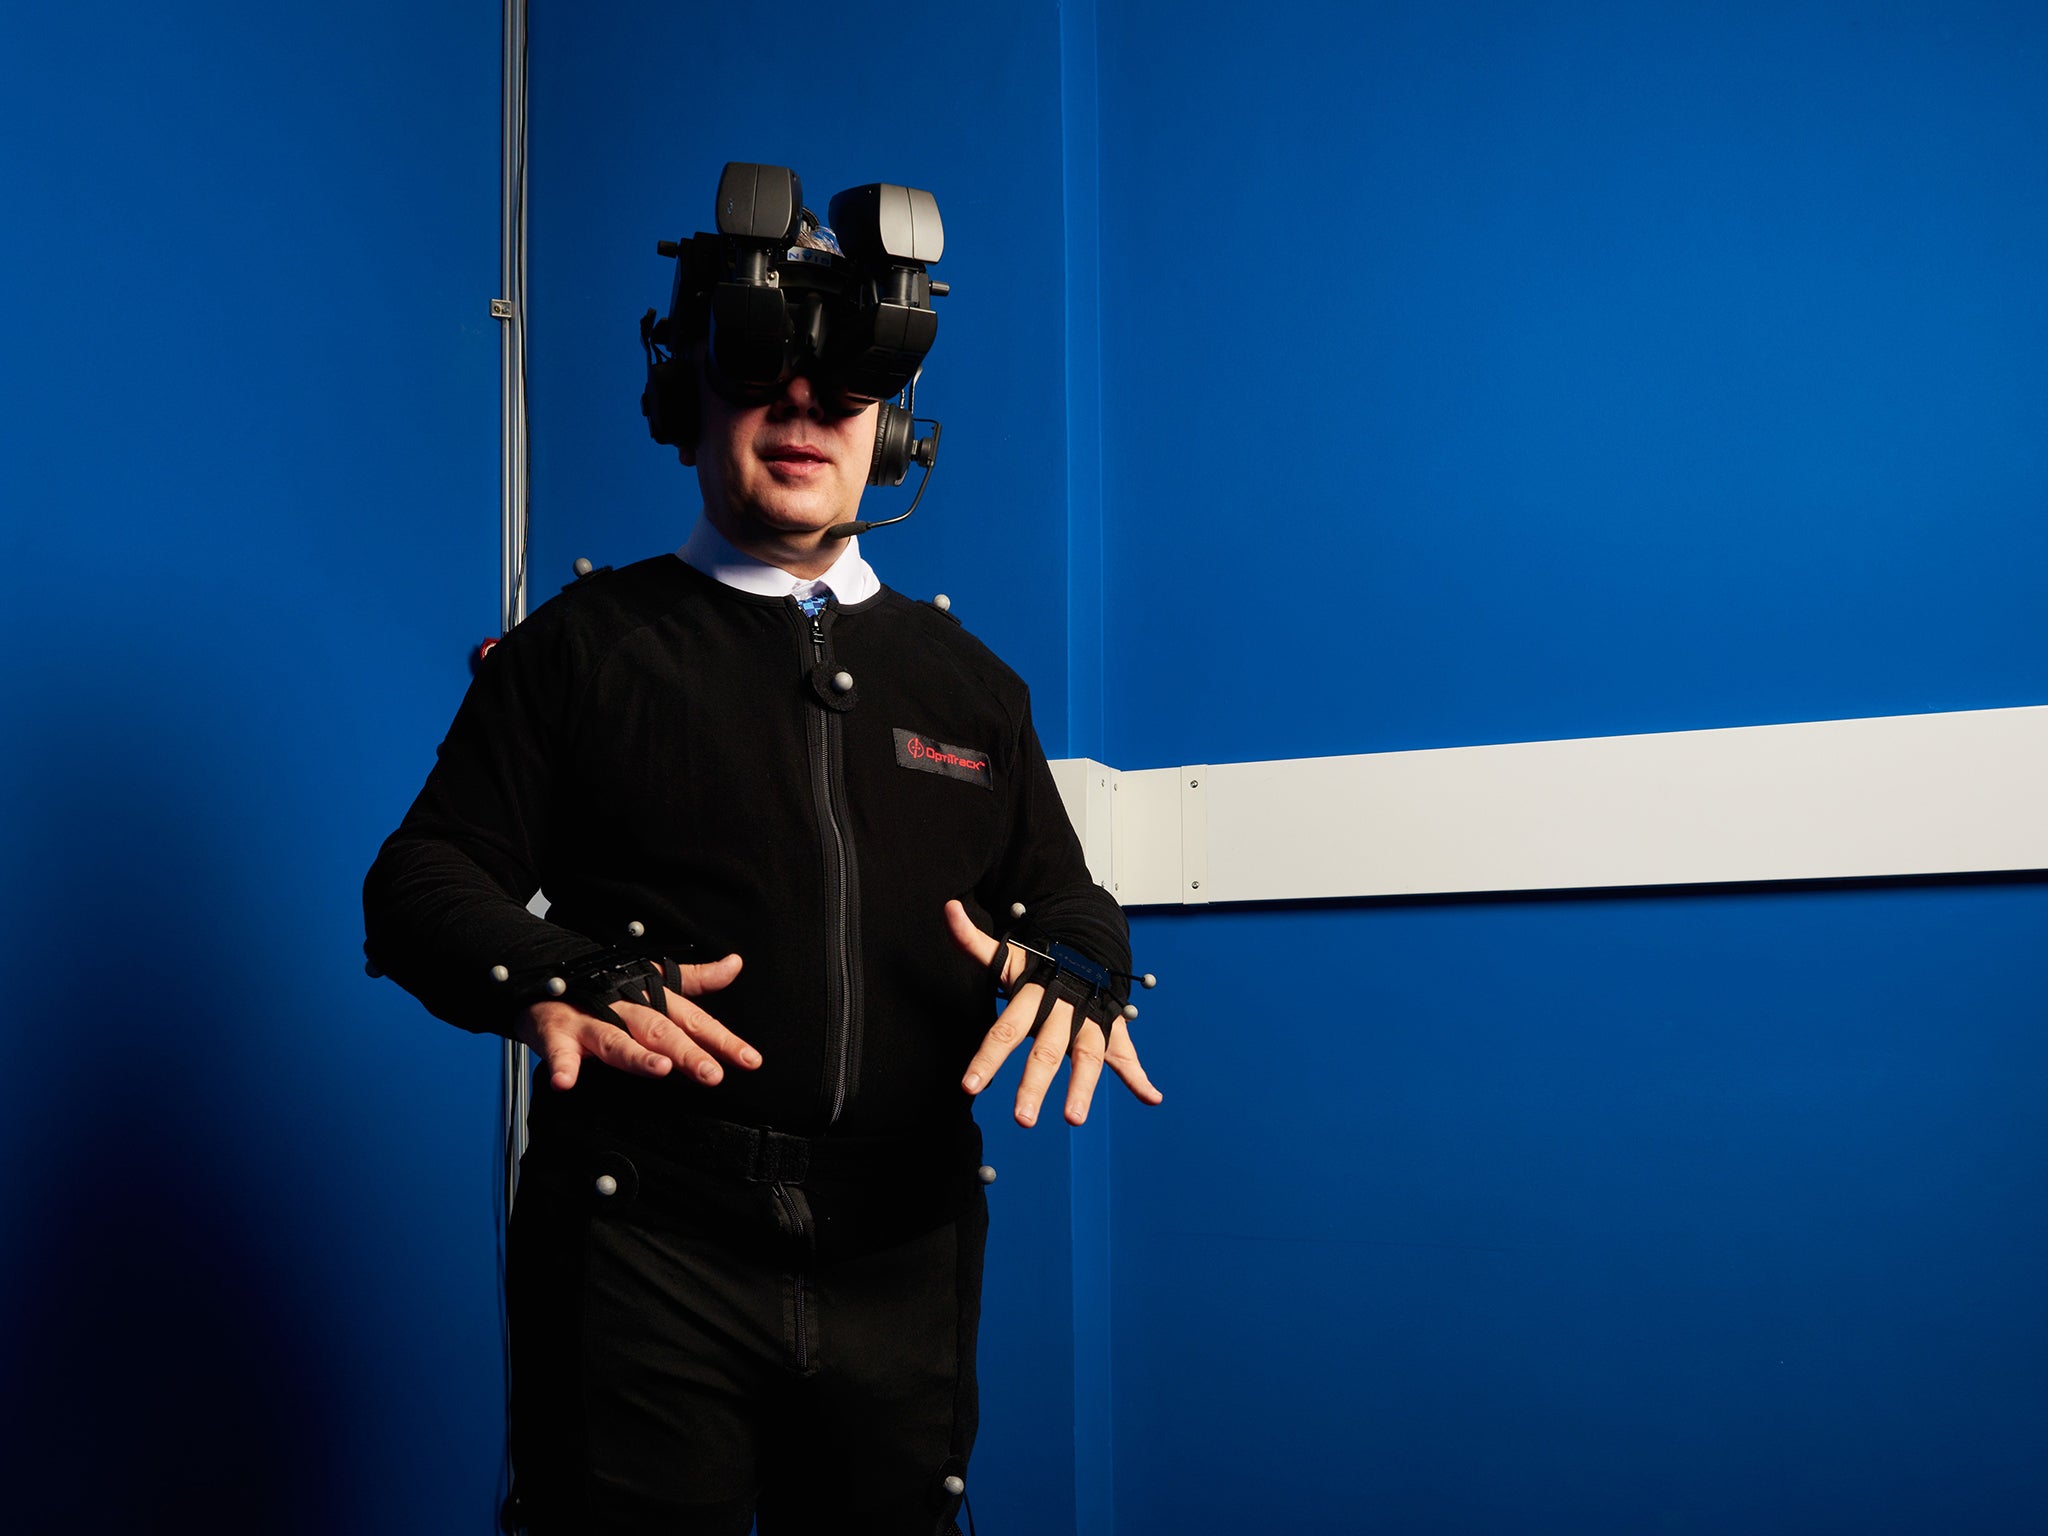 Sean O'Grady tries out a virtual reality suit at the UCL